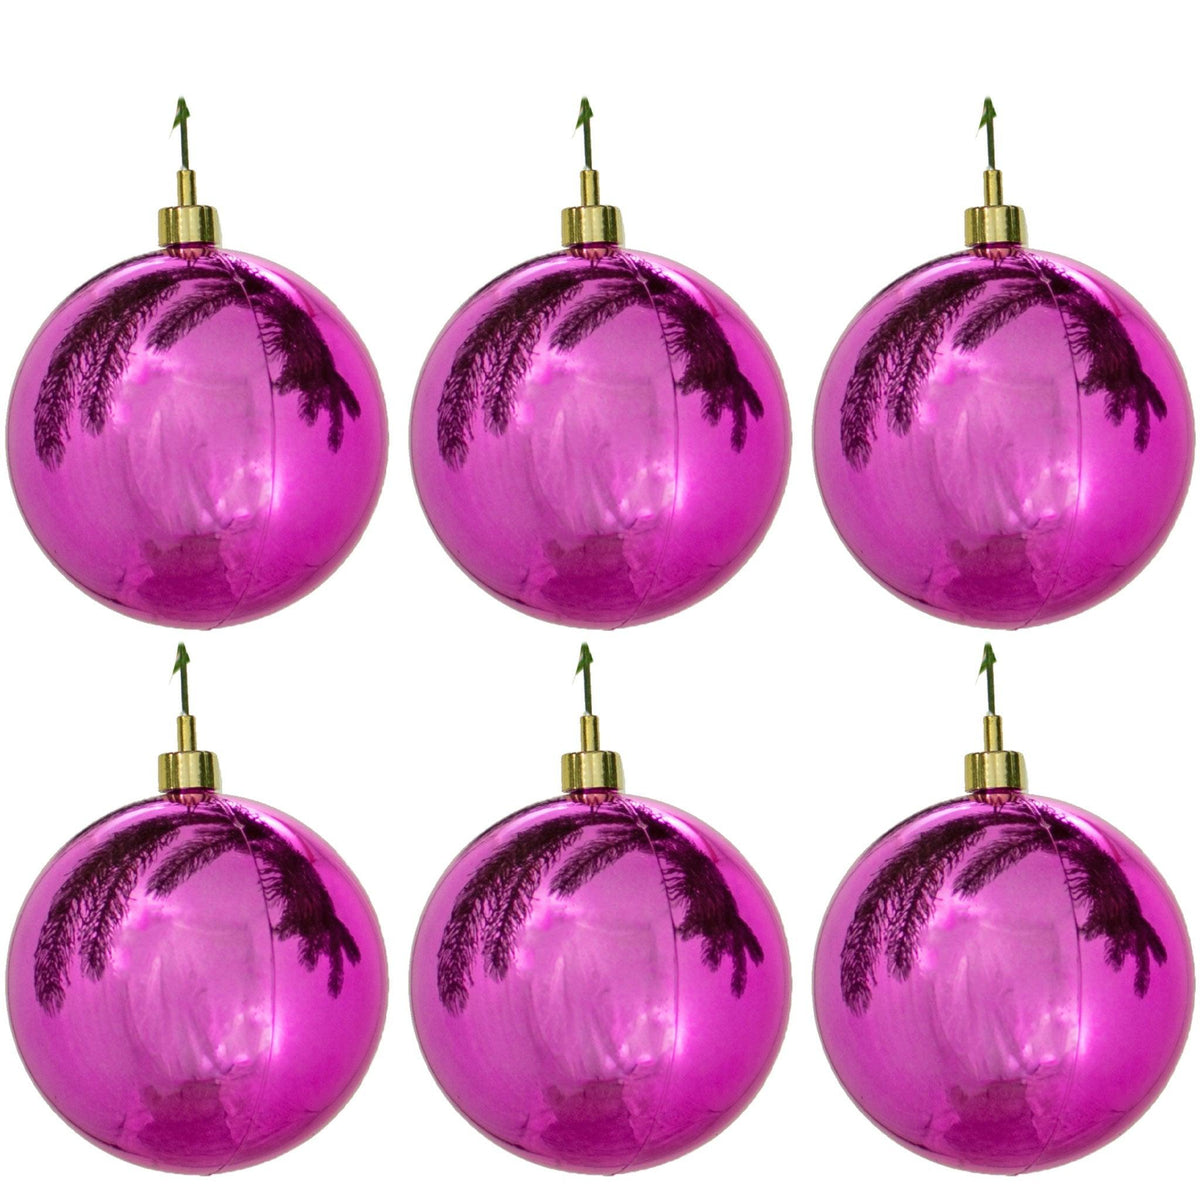 Buy Brand New Shiny Pink Plastic Ball Ornaments Wholesale Lee Display 70mm